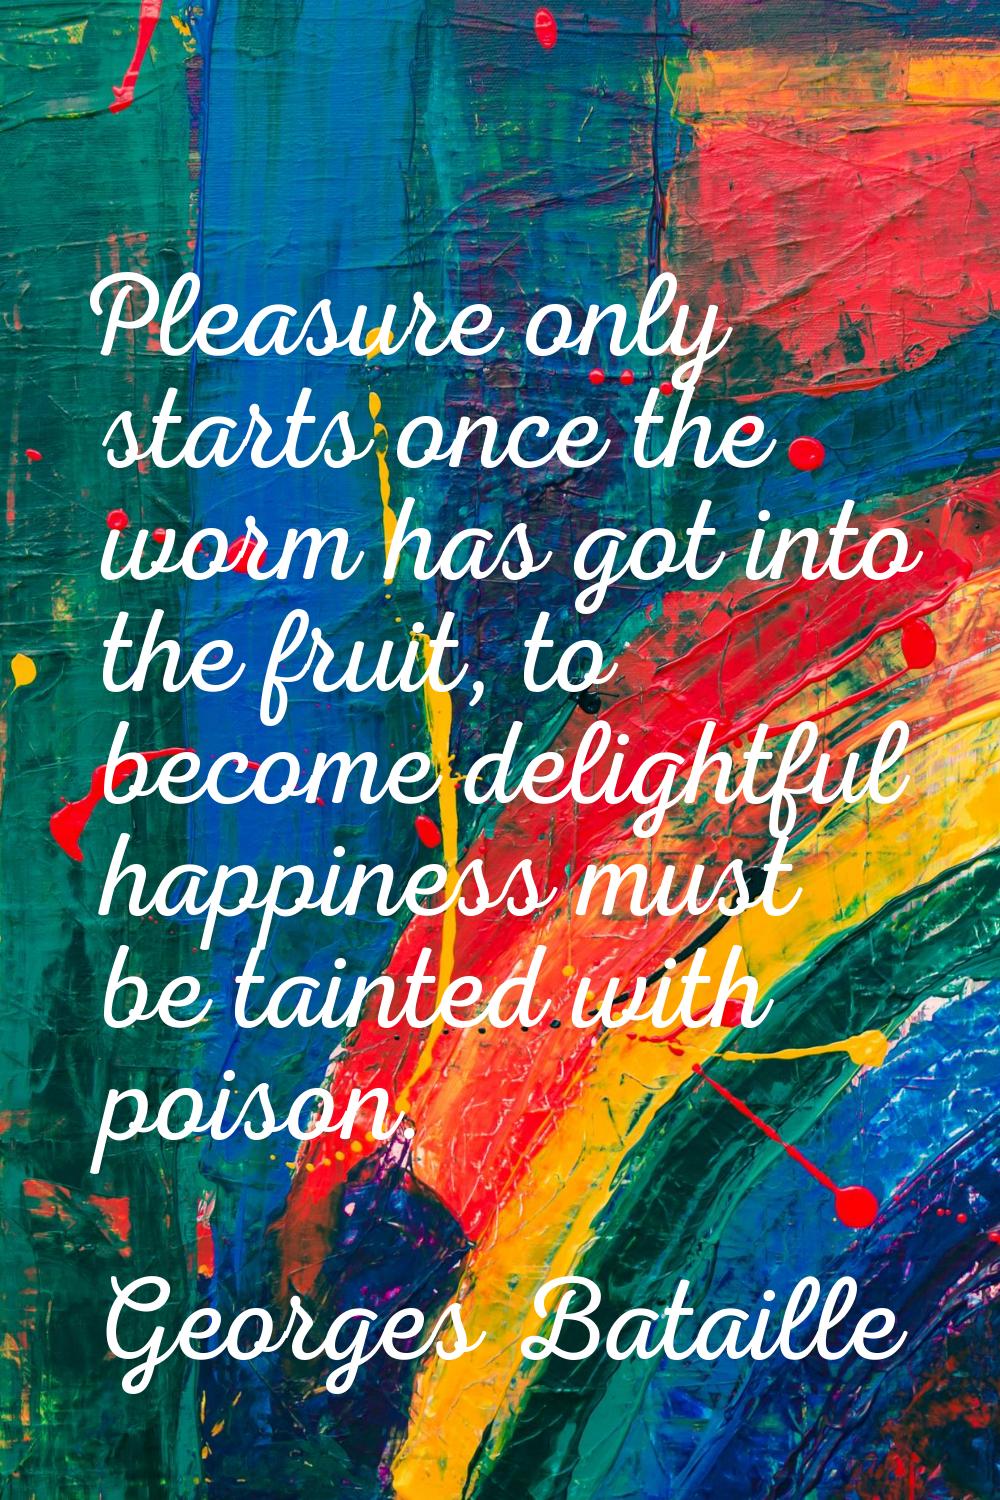 Pleasure only starts once the worm has got into the fruit, to become delightful happiness must be t